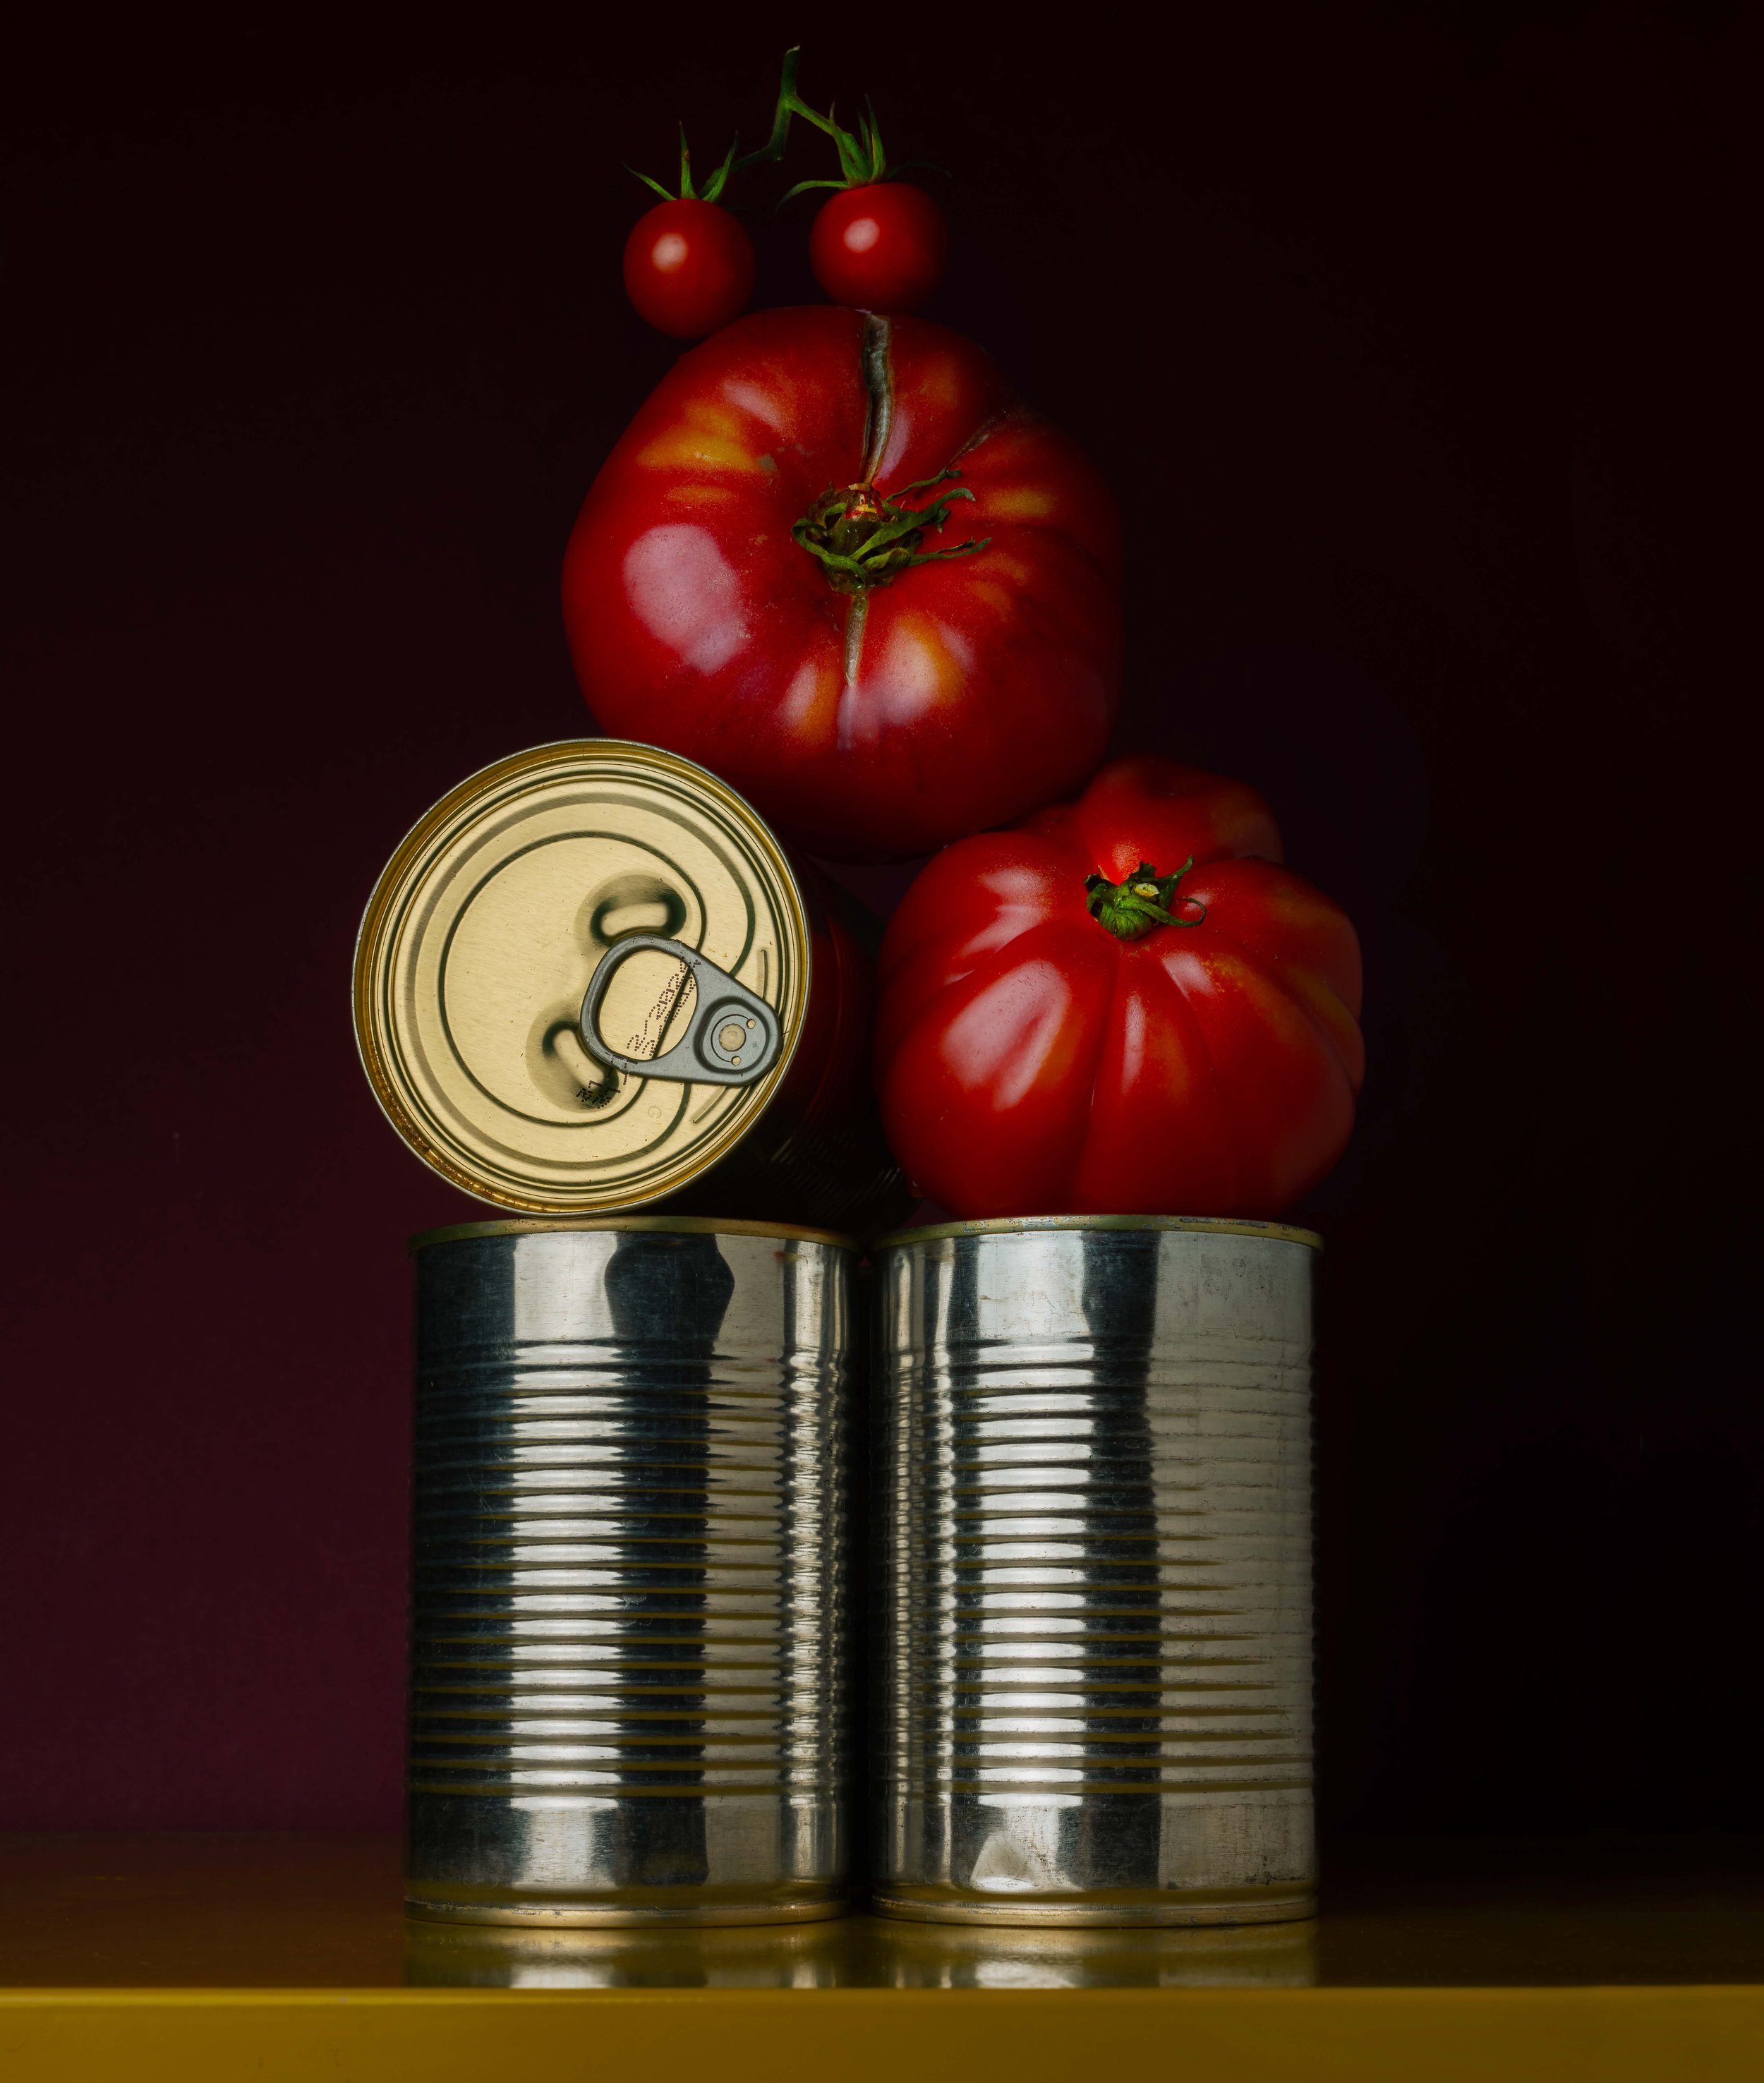 TINNED_TOMATO_CANS.jpg